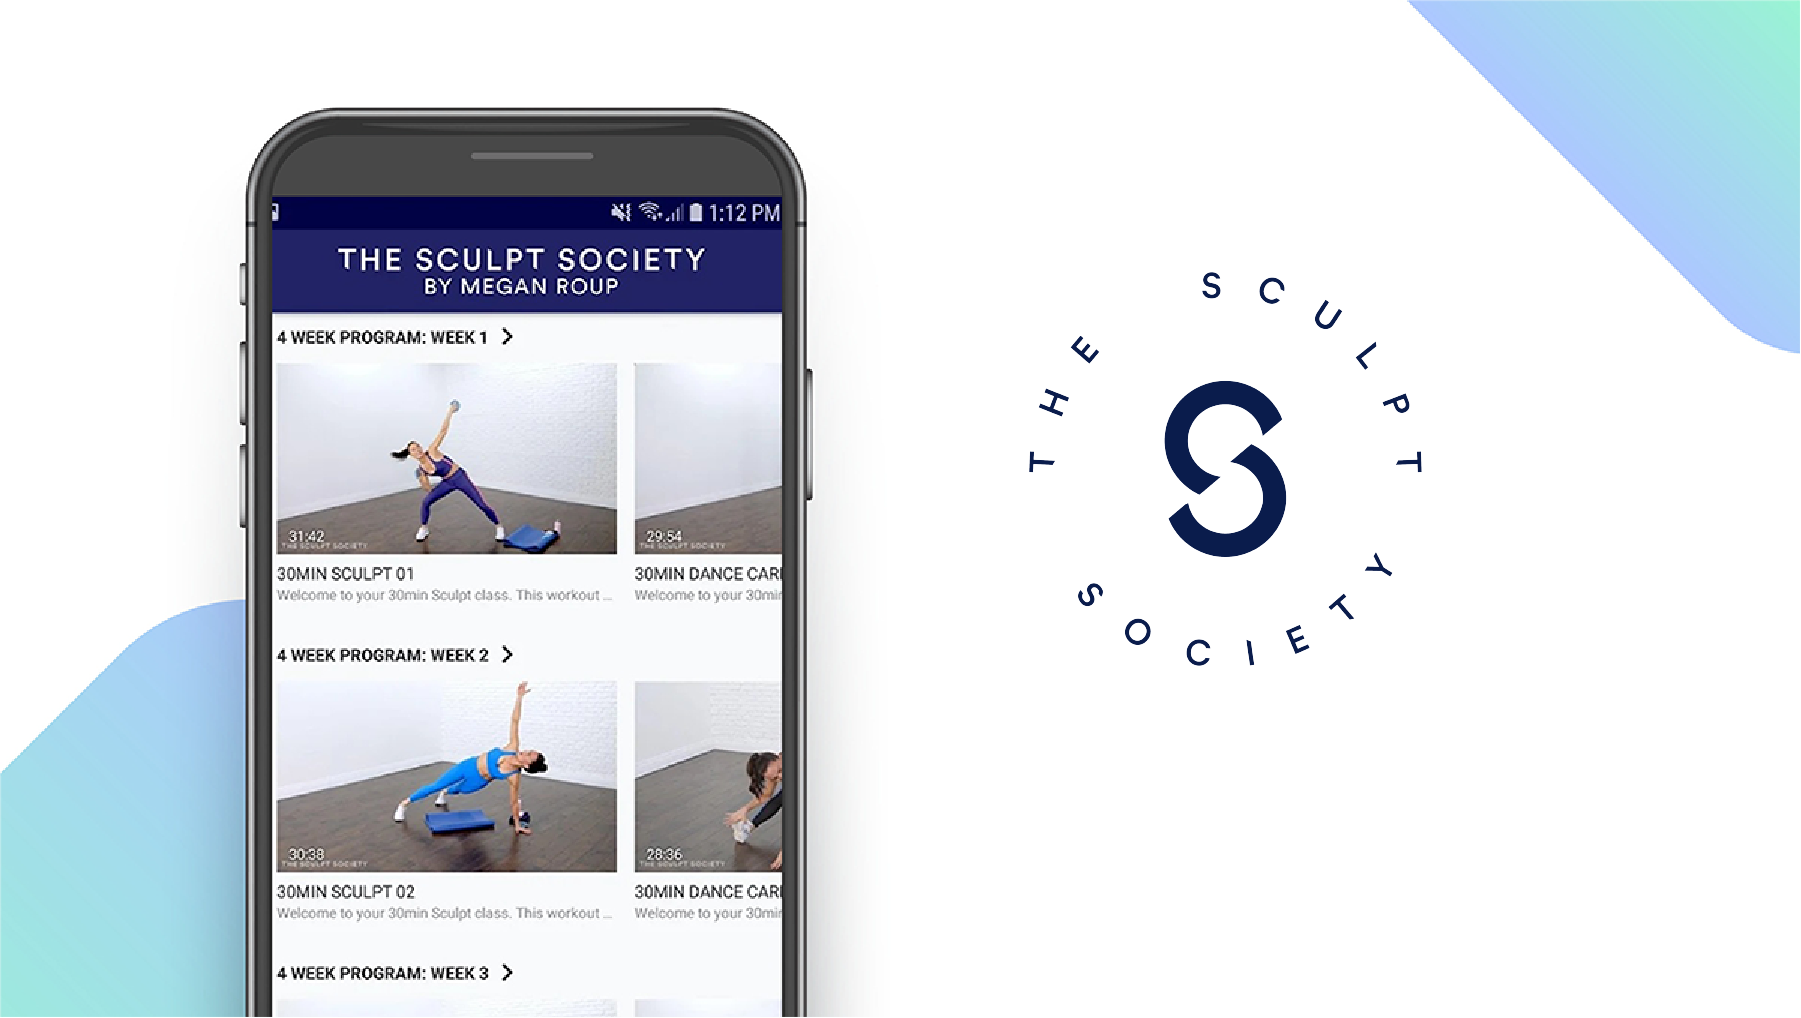 The Sculpt Society App feature